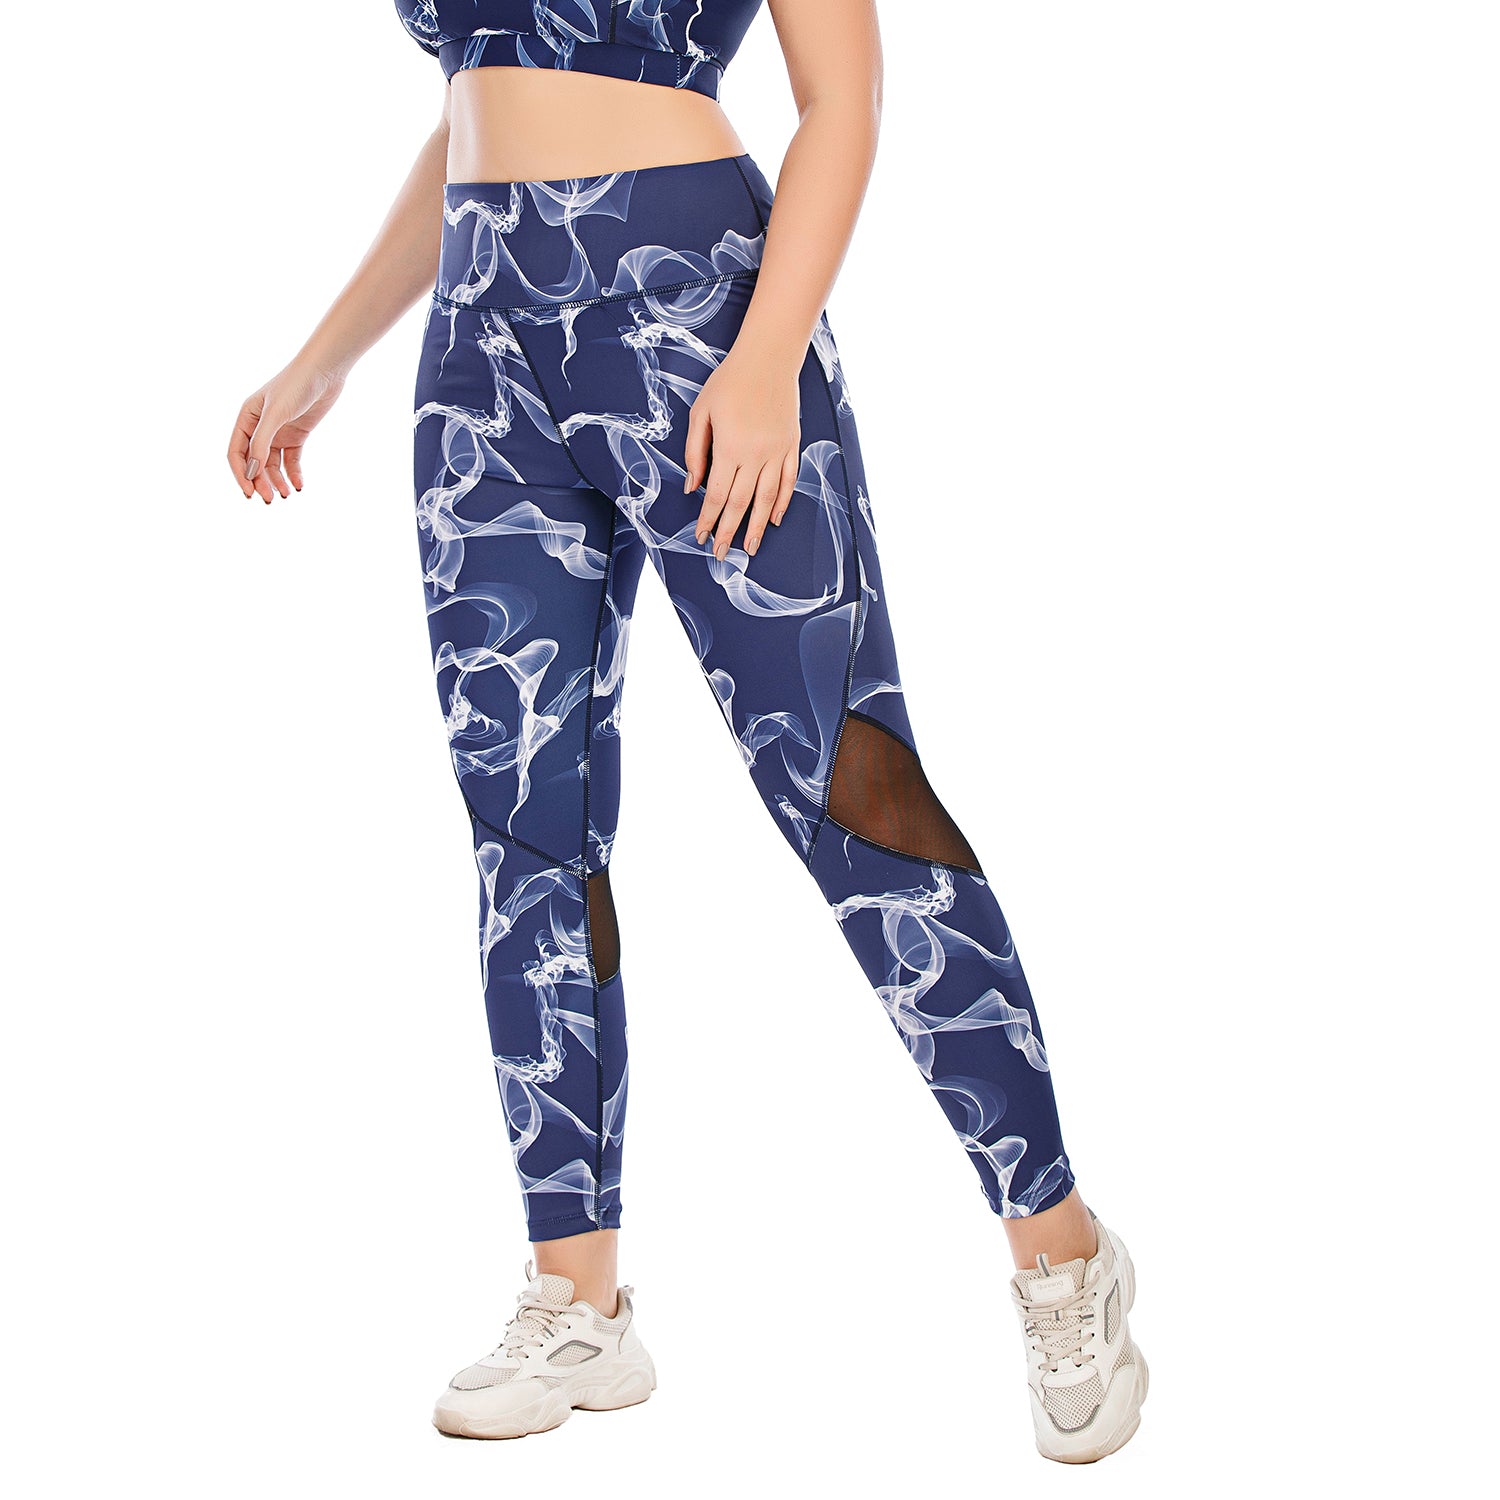 Printed Yoga Pants for Women Plus Size with Pocket